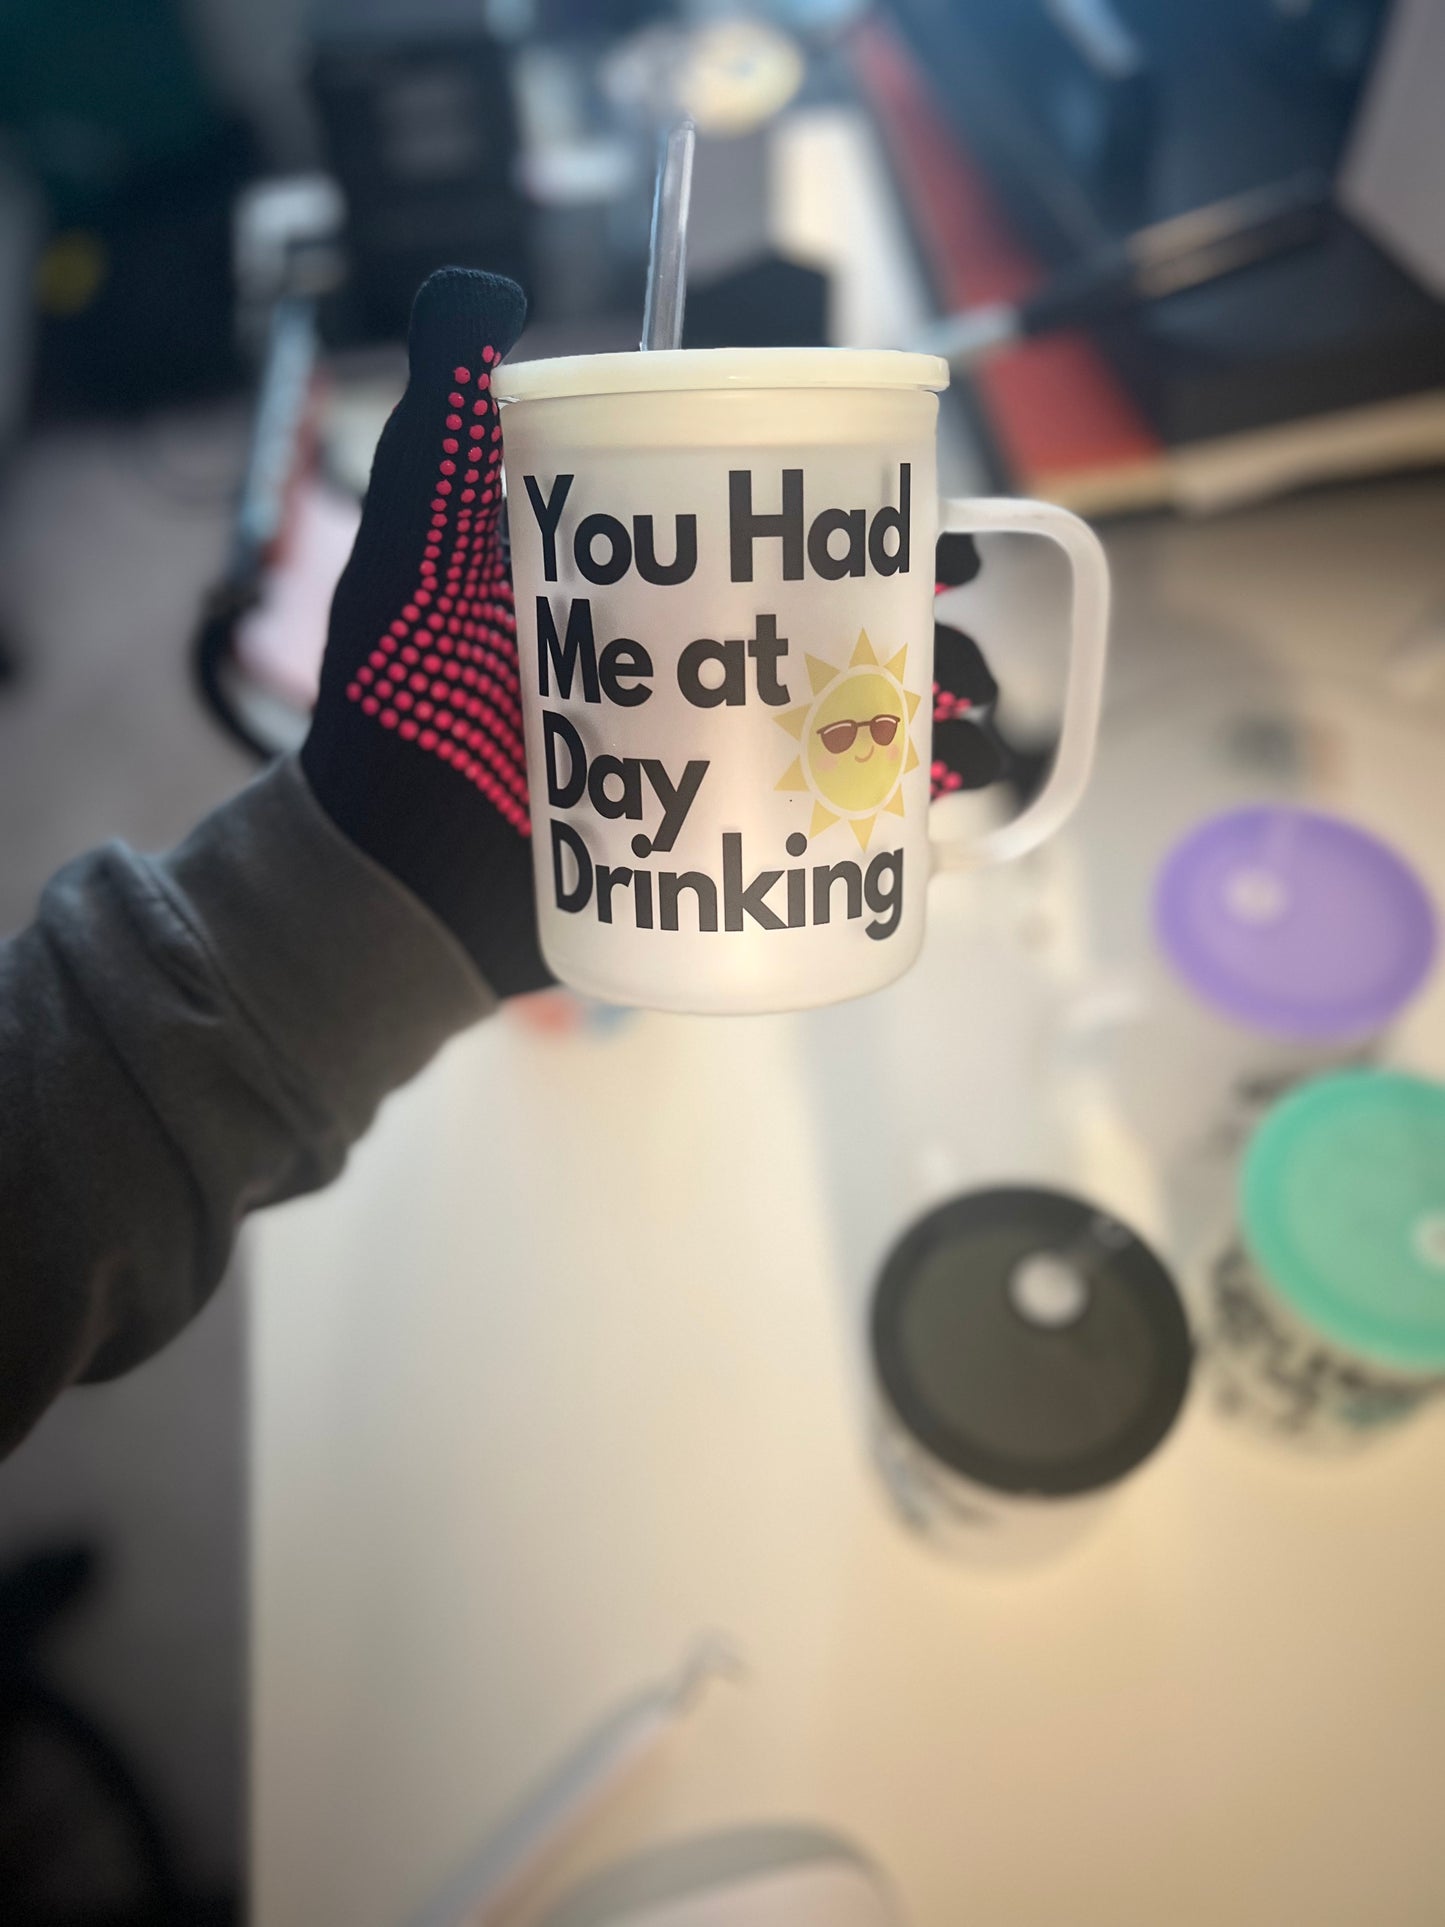 You had me at..drinking cups